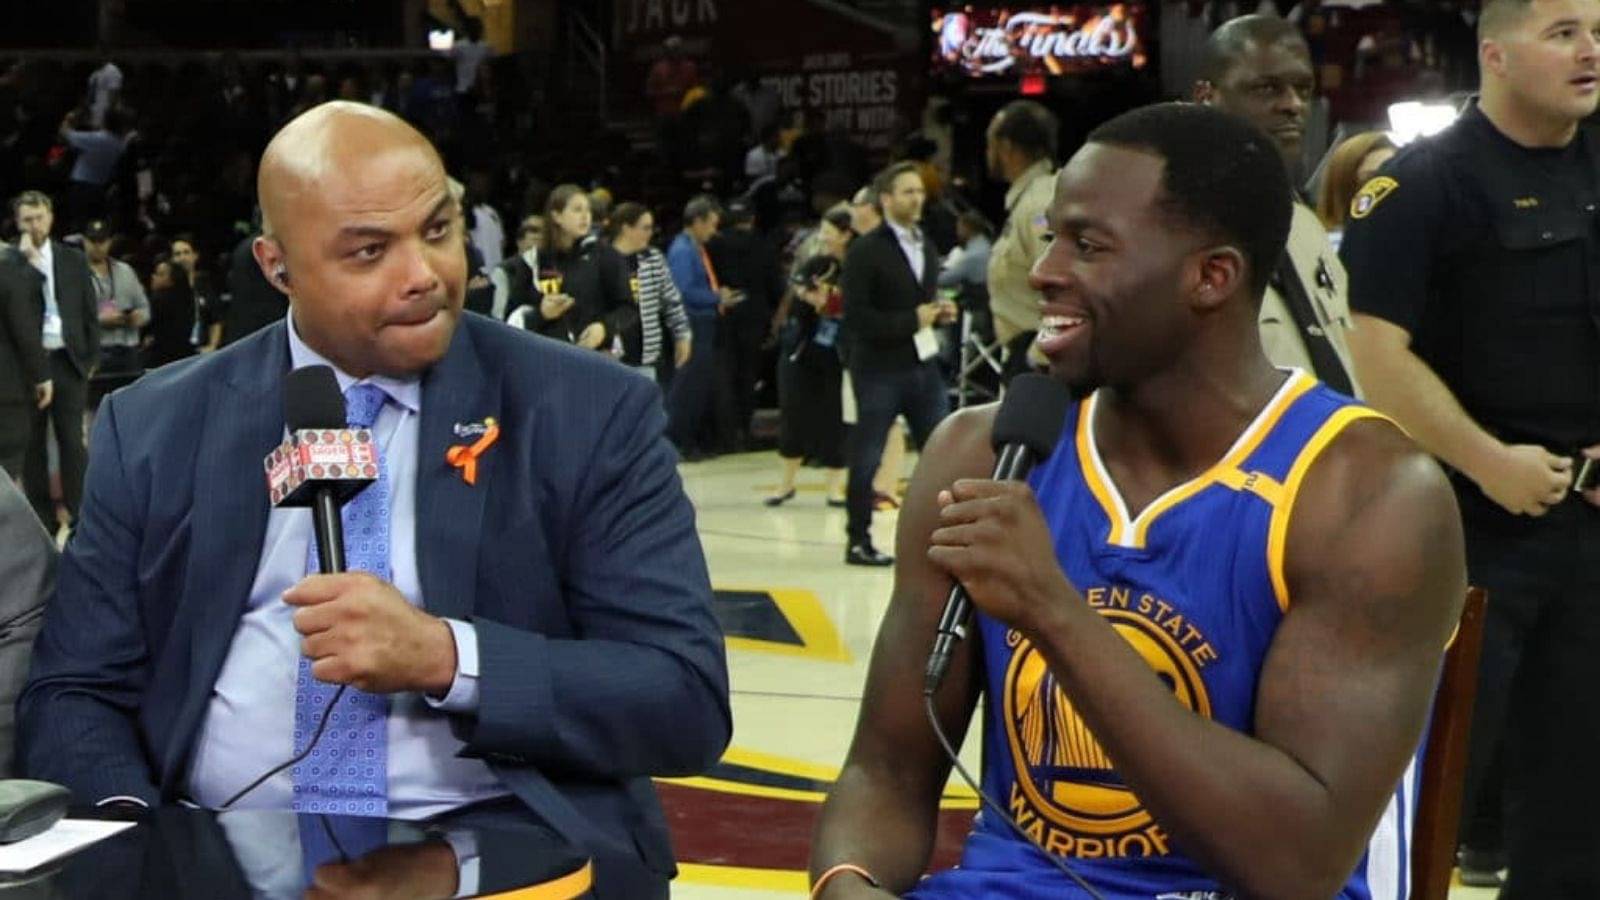 "Let's go win one more and I'll make sure I see Charles Barkley”: Draymond Green is excited to see Chuck on TNT Tuesday after sealing Game 4 against Mavs